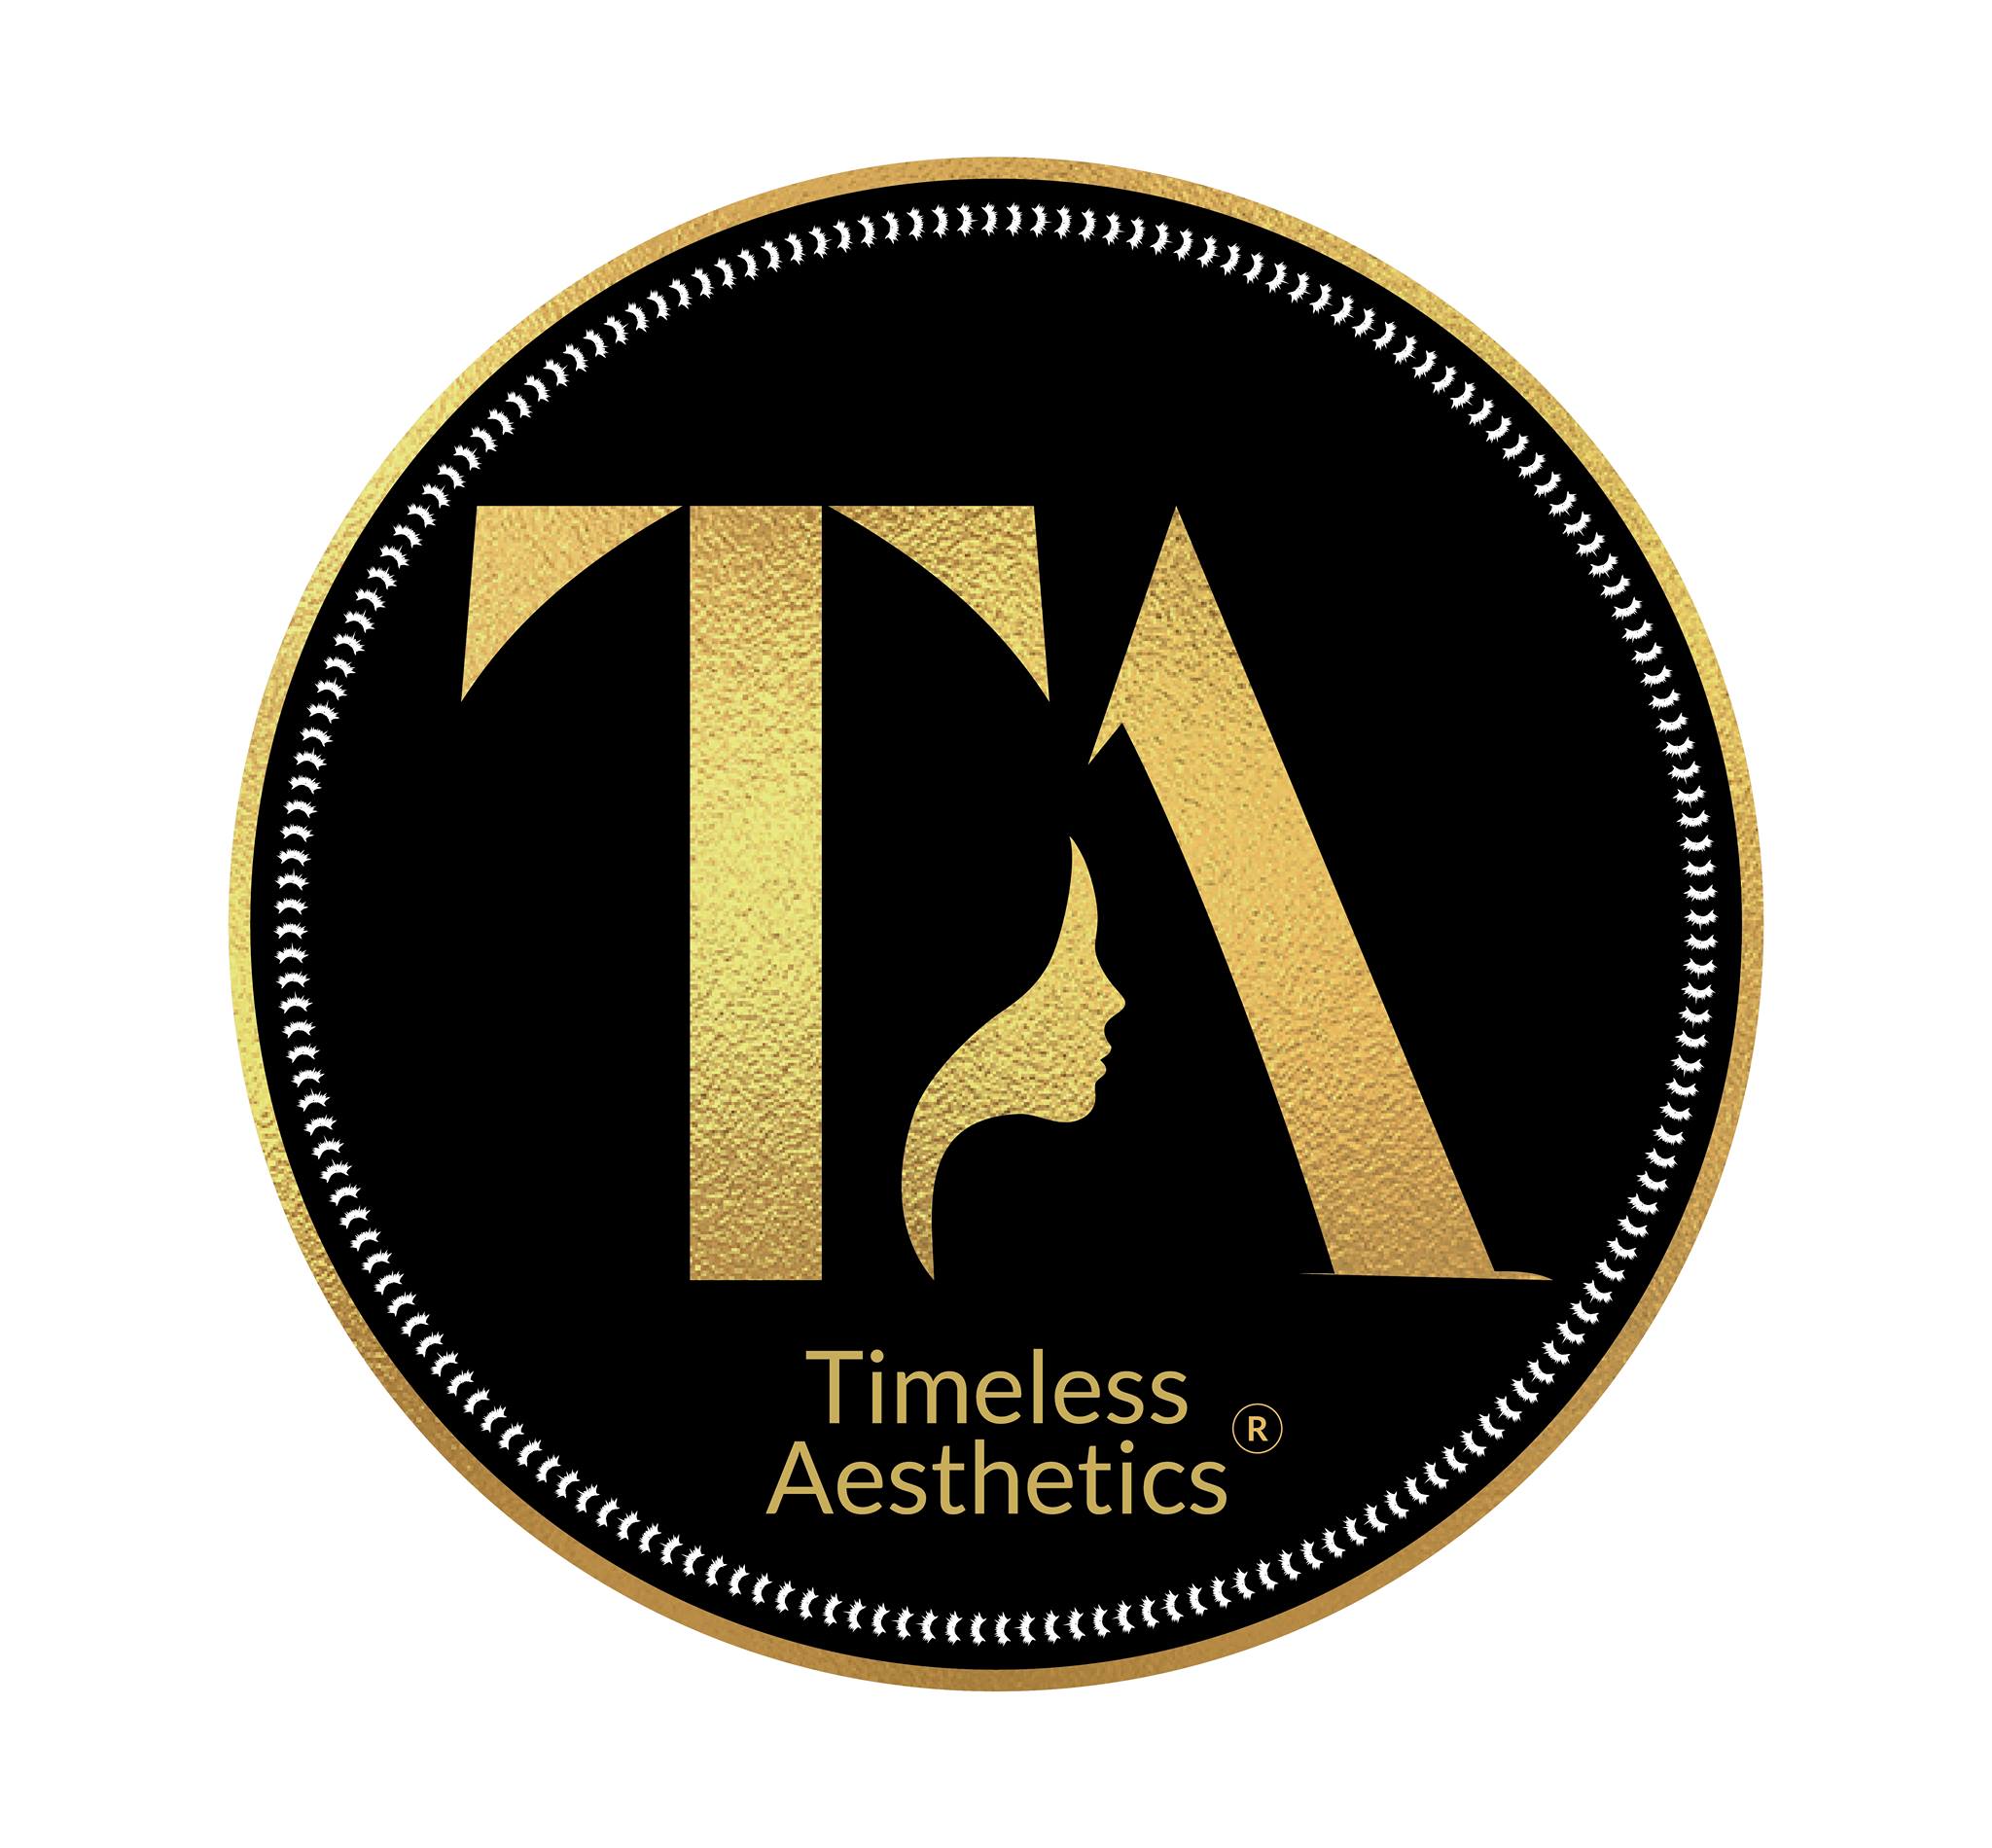 Timeless Aesthetics|Architect|Professional Services